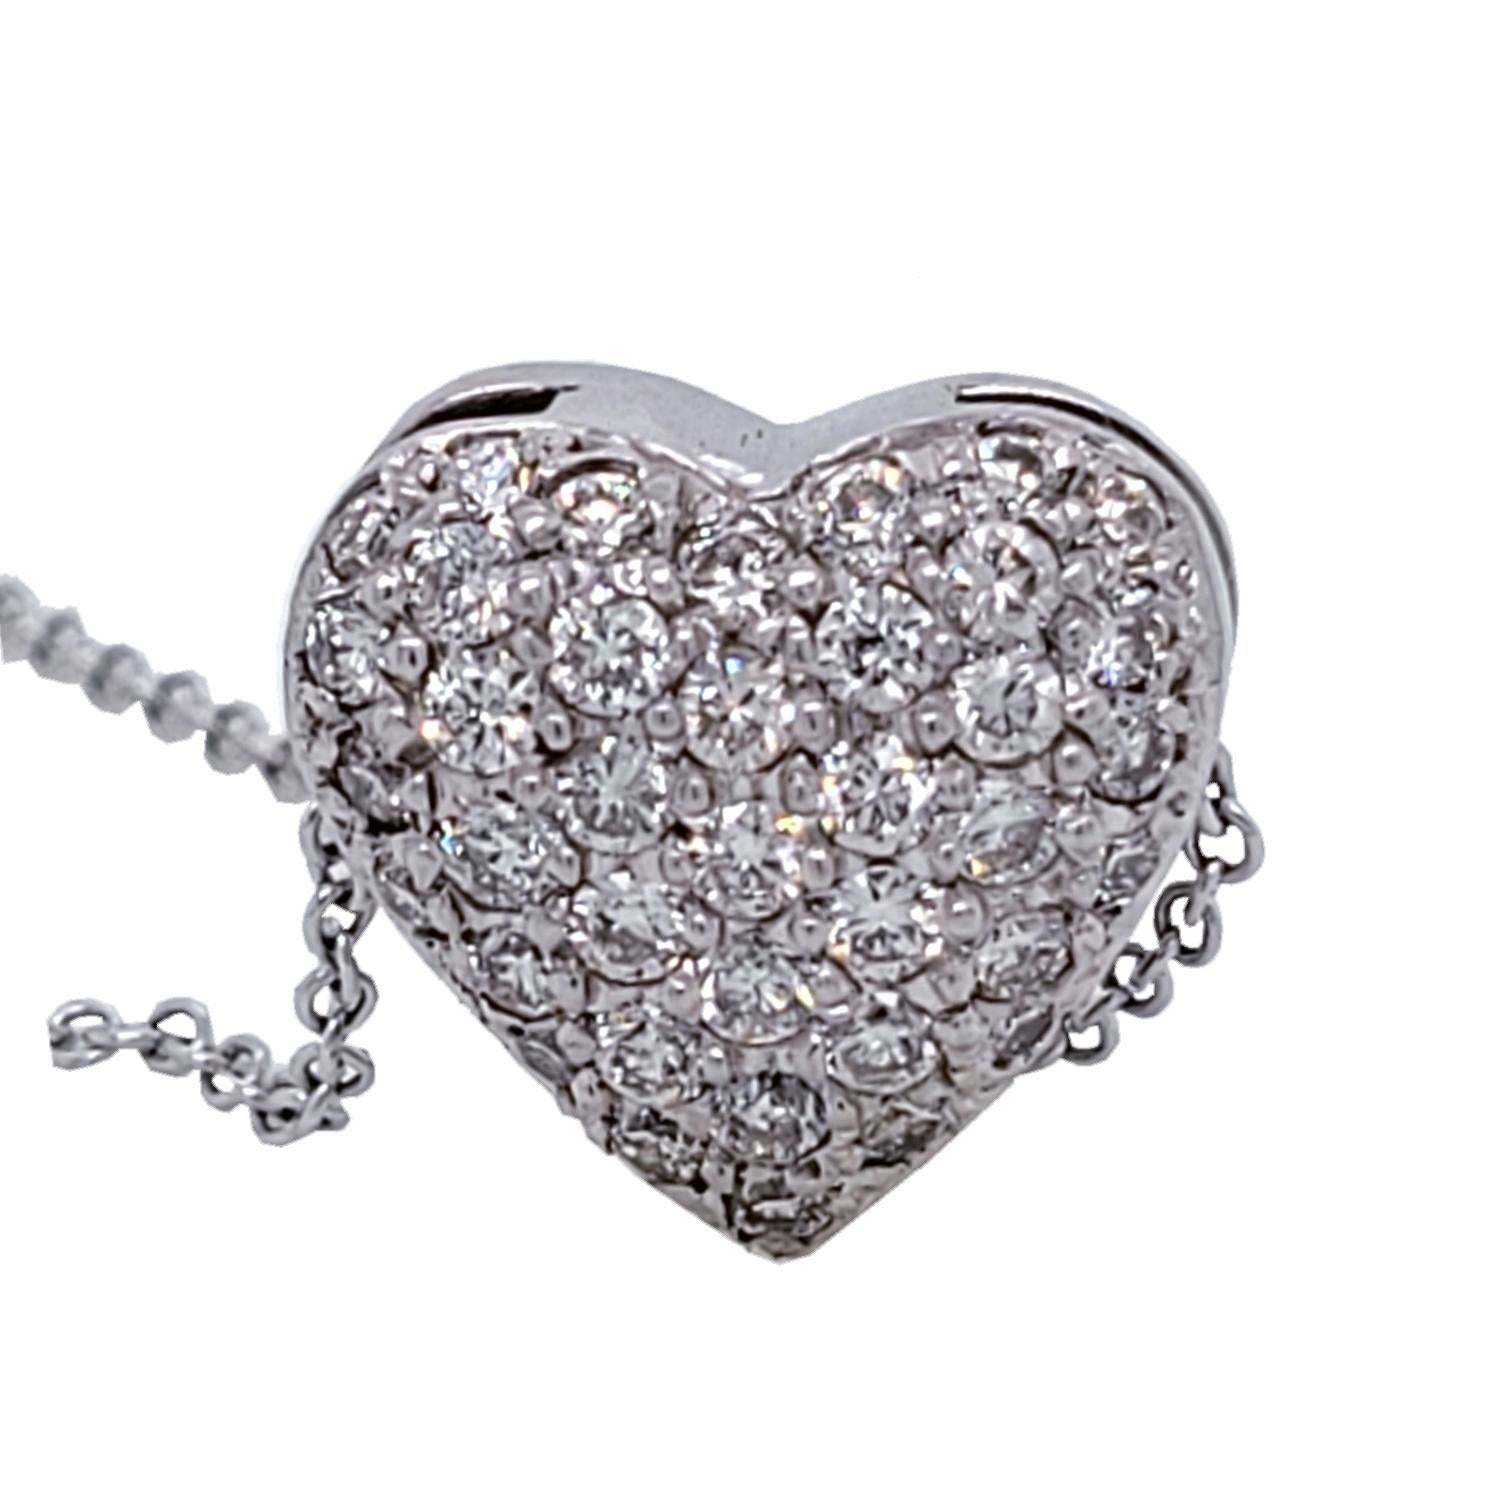 18K Domed Gold Heart shaped Pendant with 46 Pave Set Round Brilliant Diamonds  with total weight of 0.98 Ct. 
Total Diamond Weight: 0.98 Ct. The chain slides through the pendant.
Total Necklace Weight: 4.9 gr
Pendant Size 13x13 mm (5.8 mm